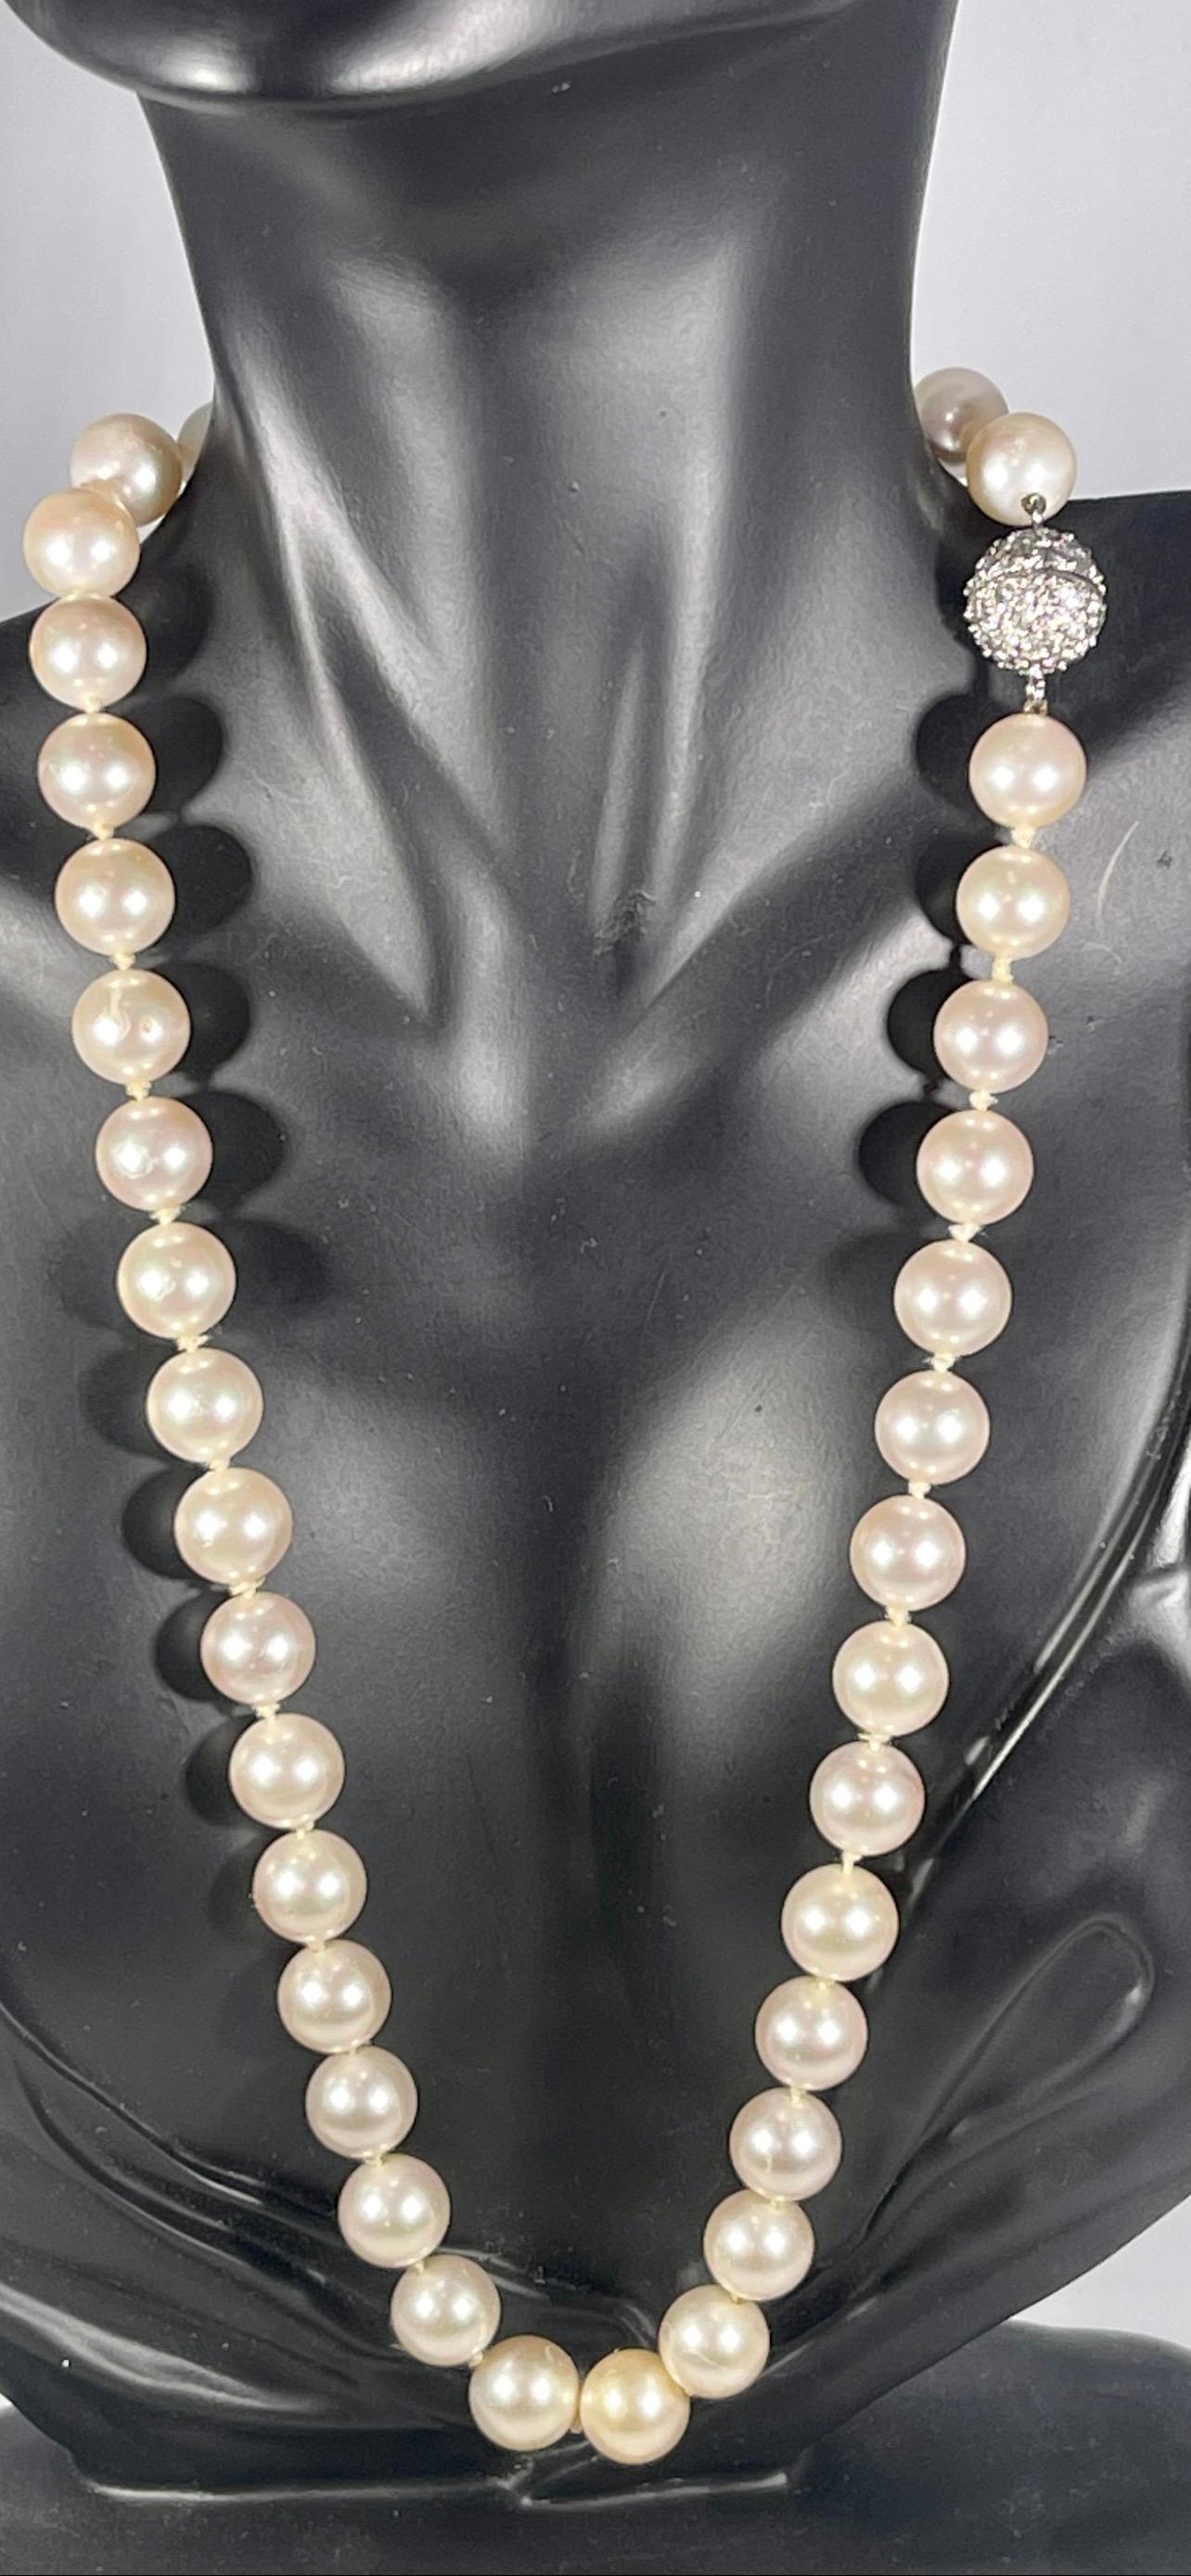 41 Round Akoya Pearls Strand Necklace Set in Metal Ball Clasp For Sale 6